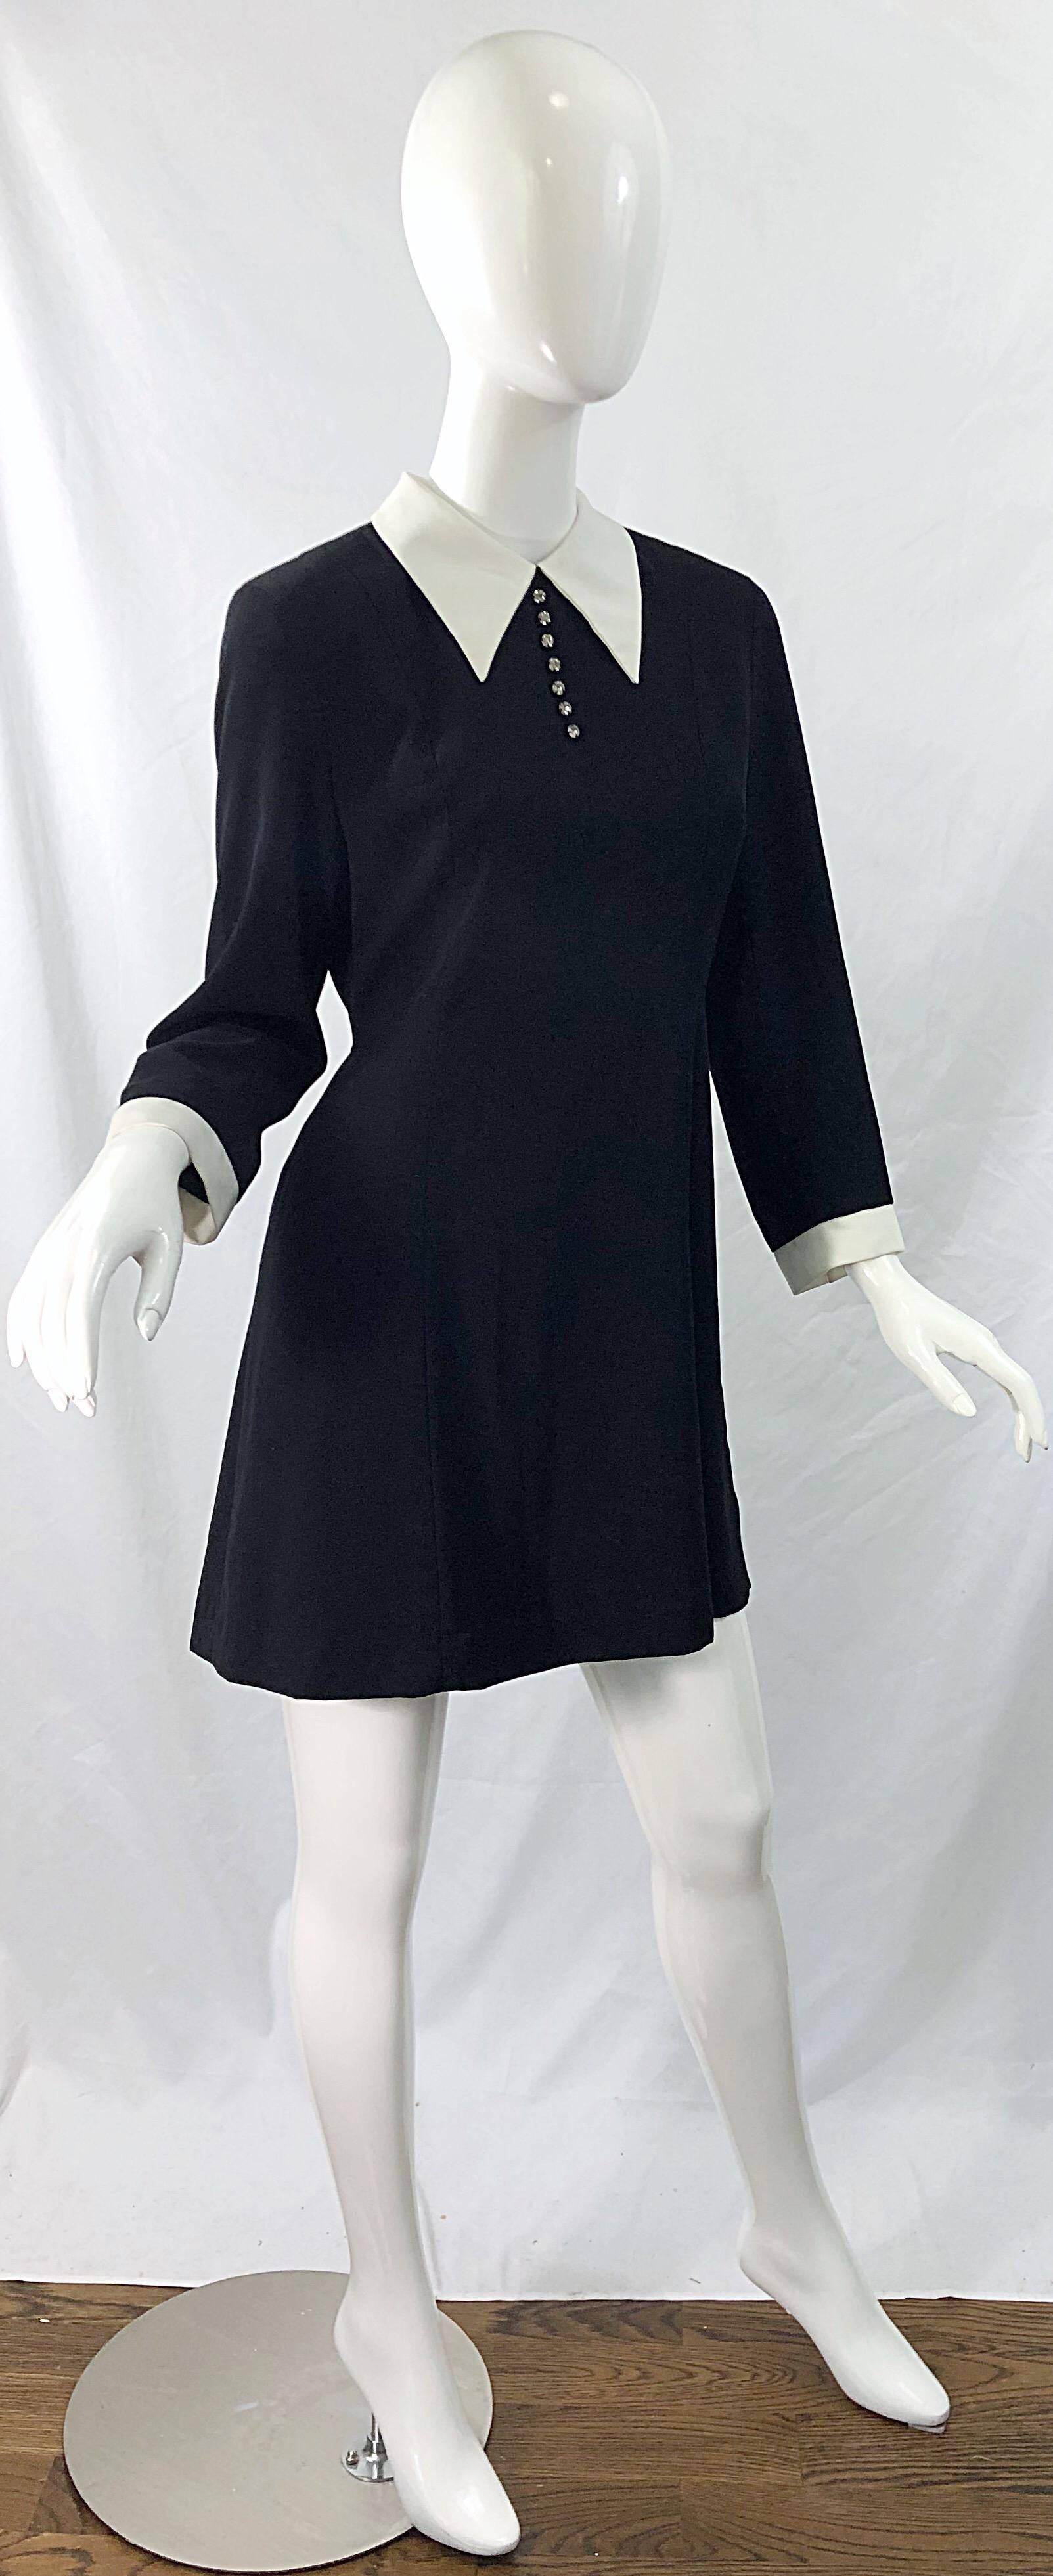 Vintage Givenchy 1990s Black and White Rhinestone Long Sleeve 90s Mini Dress For Sale 3